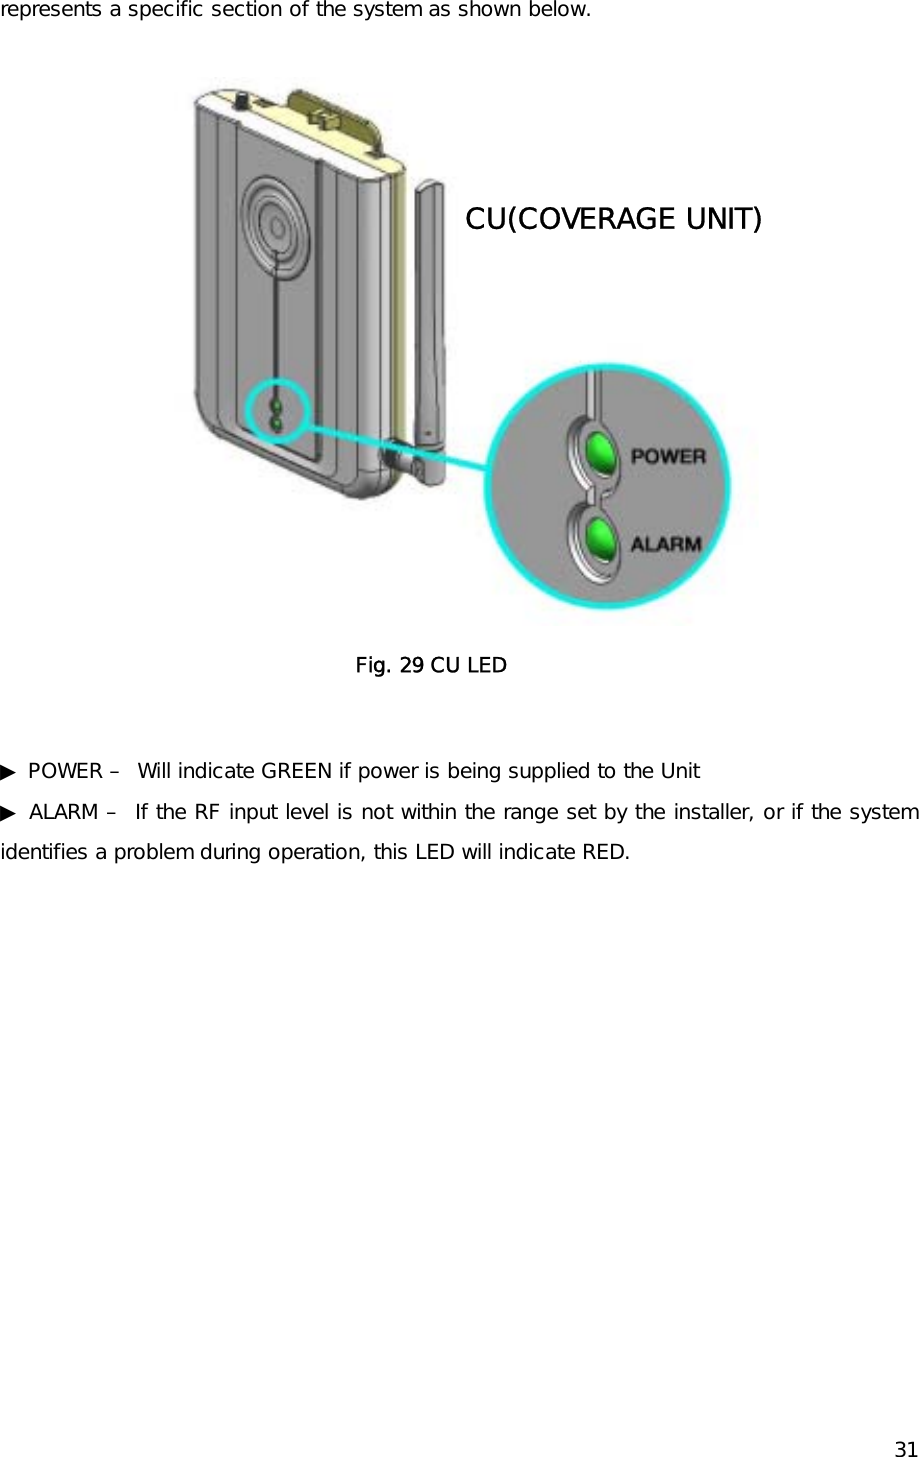    31represents a specific section of the system as shown below.    Fig. 29 CU LED   ▶ POWER –  Will indicate GREEN if power is being supplied to the Unit ▶ ALARM –  If the RF input level is not within the range set by the installer, or if the system identifies a problem during operation, this LED will indicate RED.  CU(COVERAGE UNIT) 